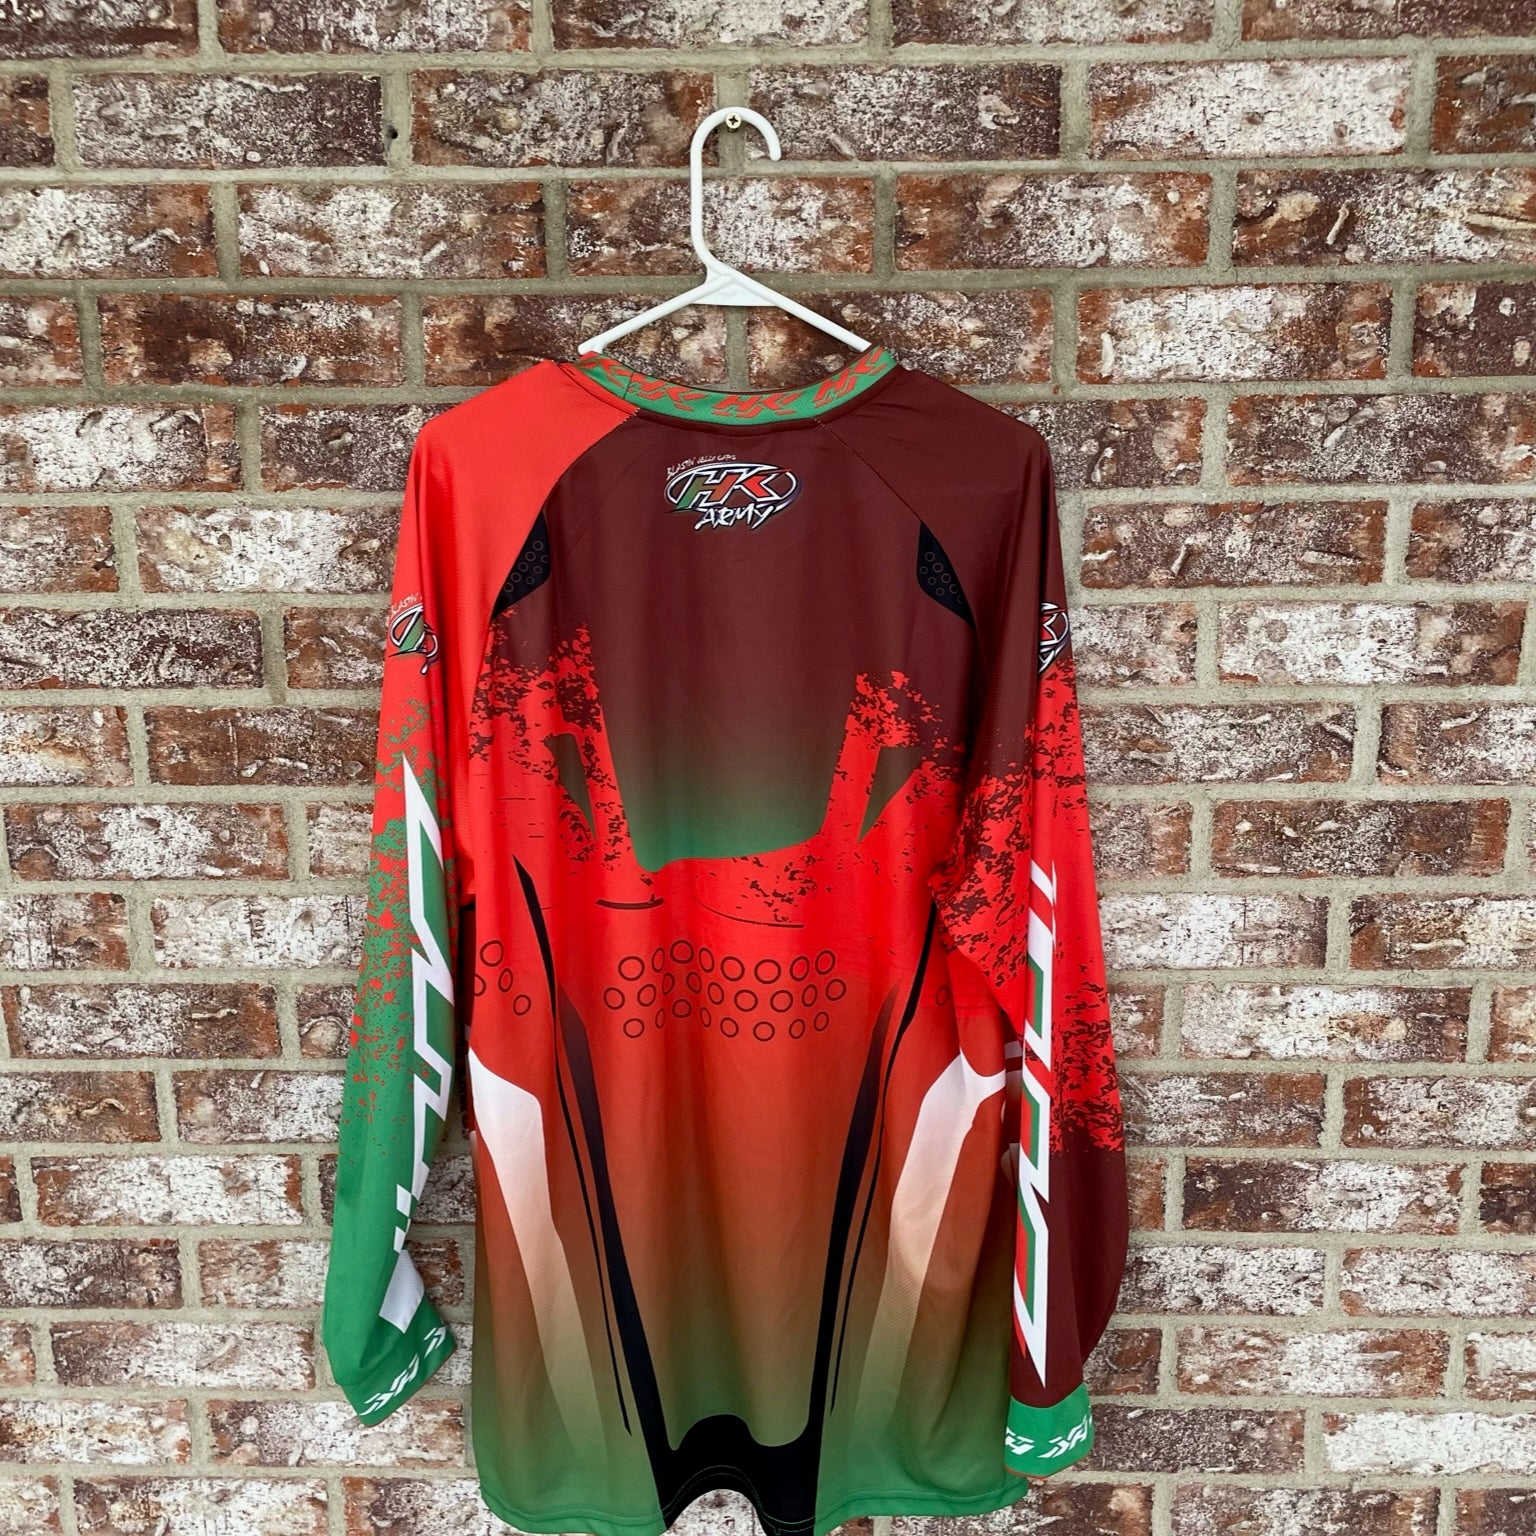 Used HK Army Paintball Jersey - X-Large